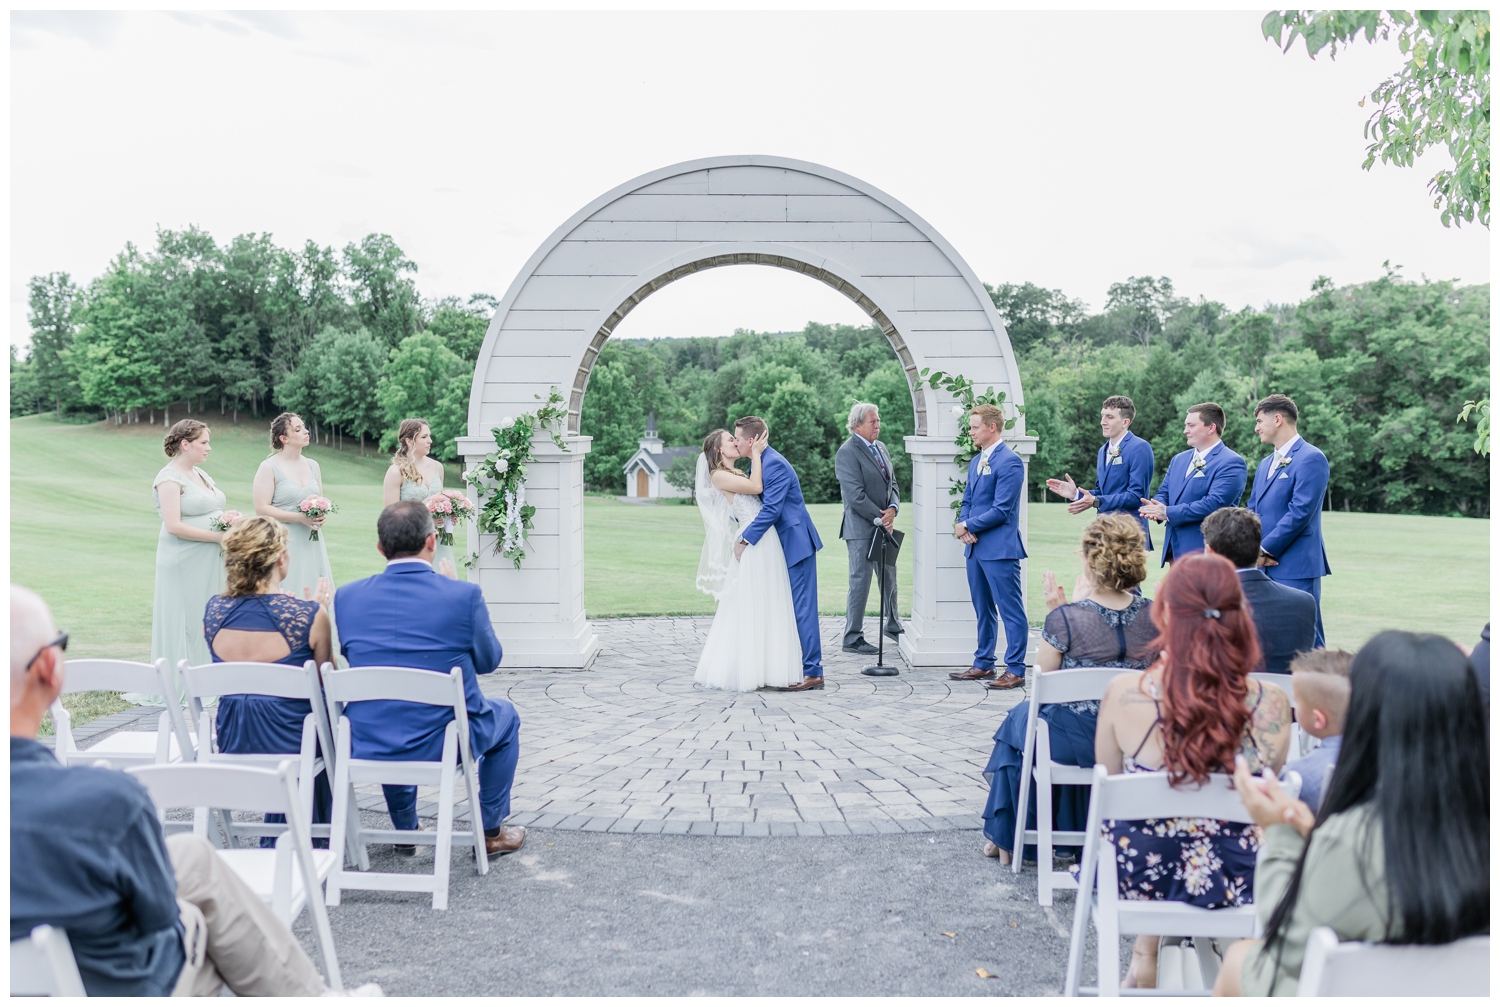 First kiss as husband and wife on their wedding day at Hayloft at the Arch. This beautiful outdoor barn wedding venue is perfect for intimate weddings and an elegant barn feel. Photographed in a light and airy style by Nicole Weeks Photography who is based in Albany, NY.